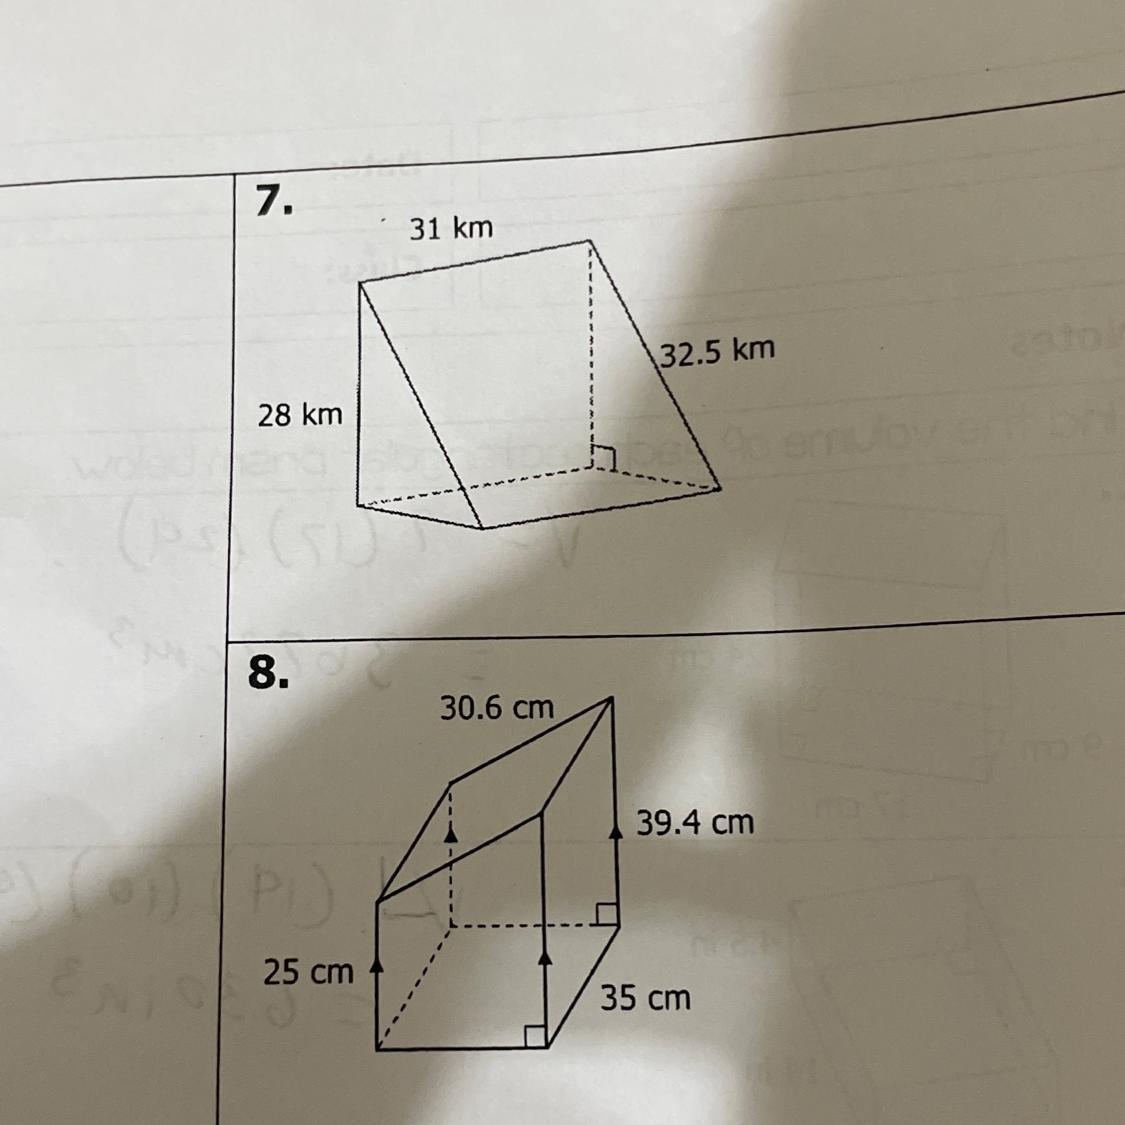 How Do I Solve Both Of These?